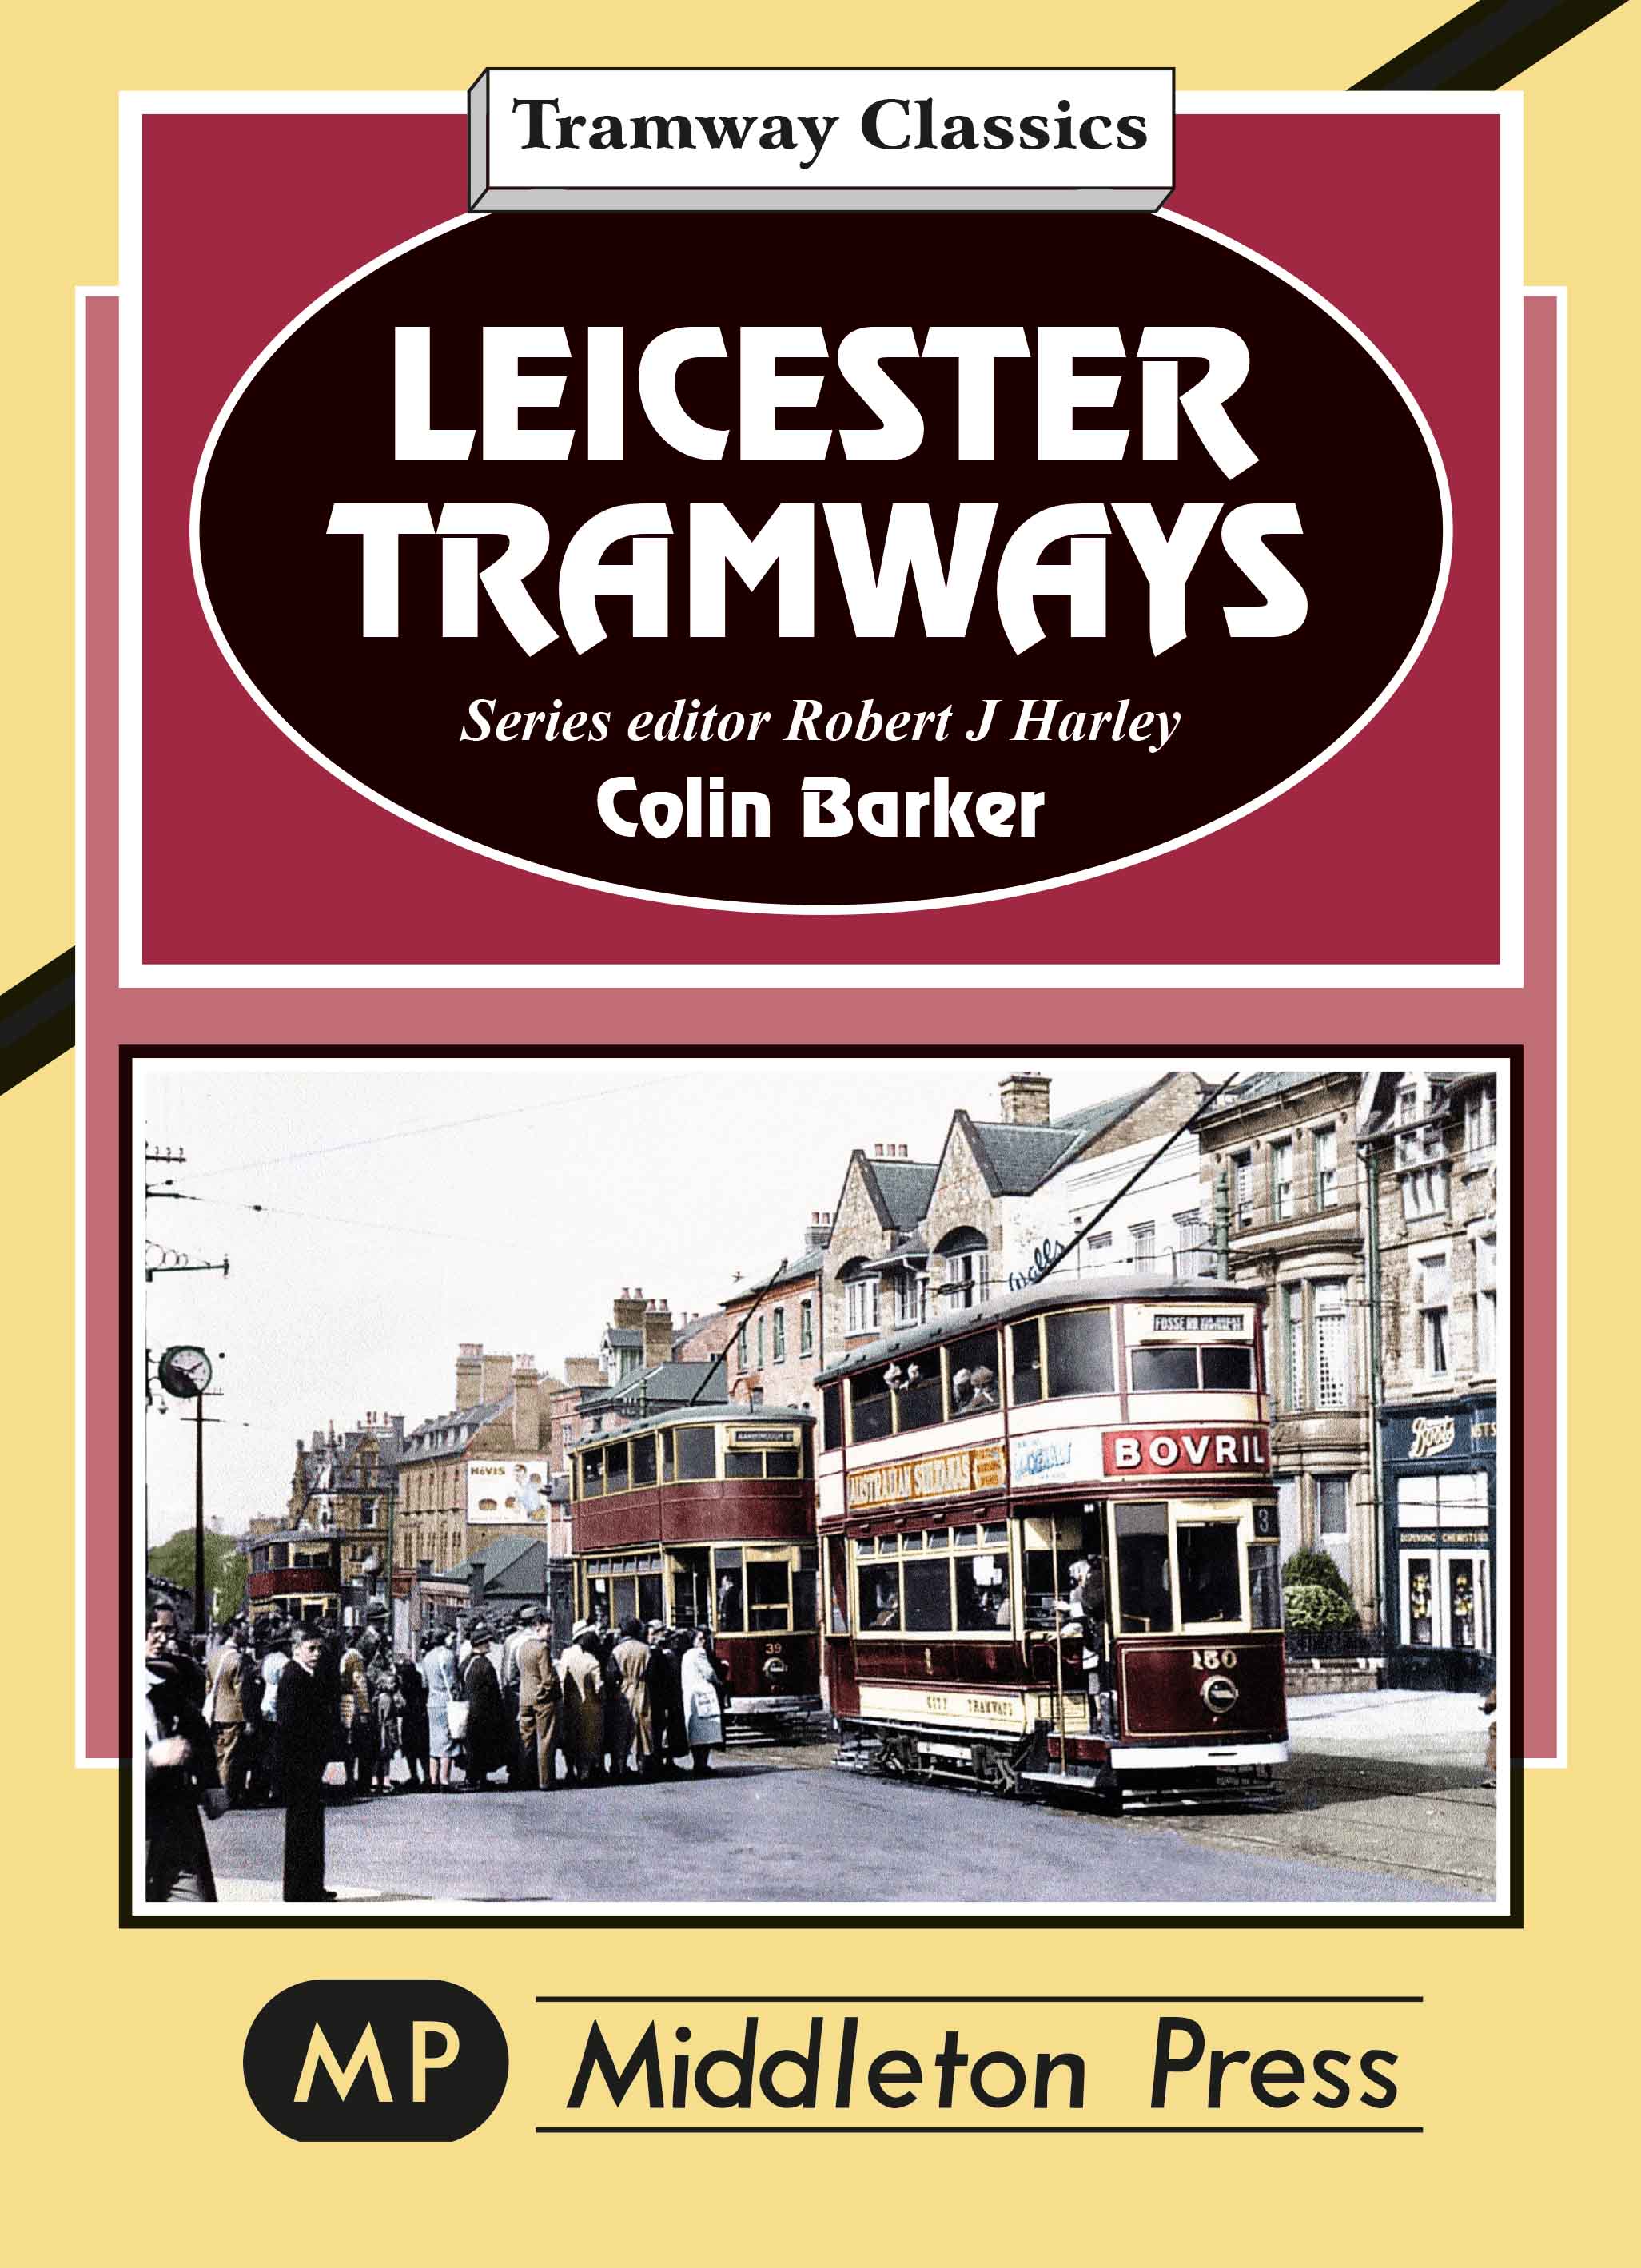 Tramway Classics Leicester Tramways